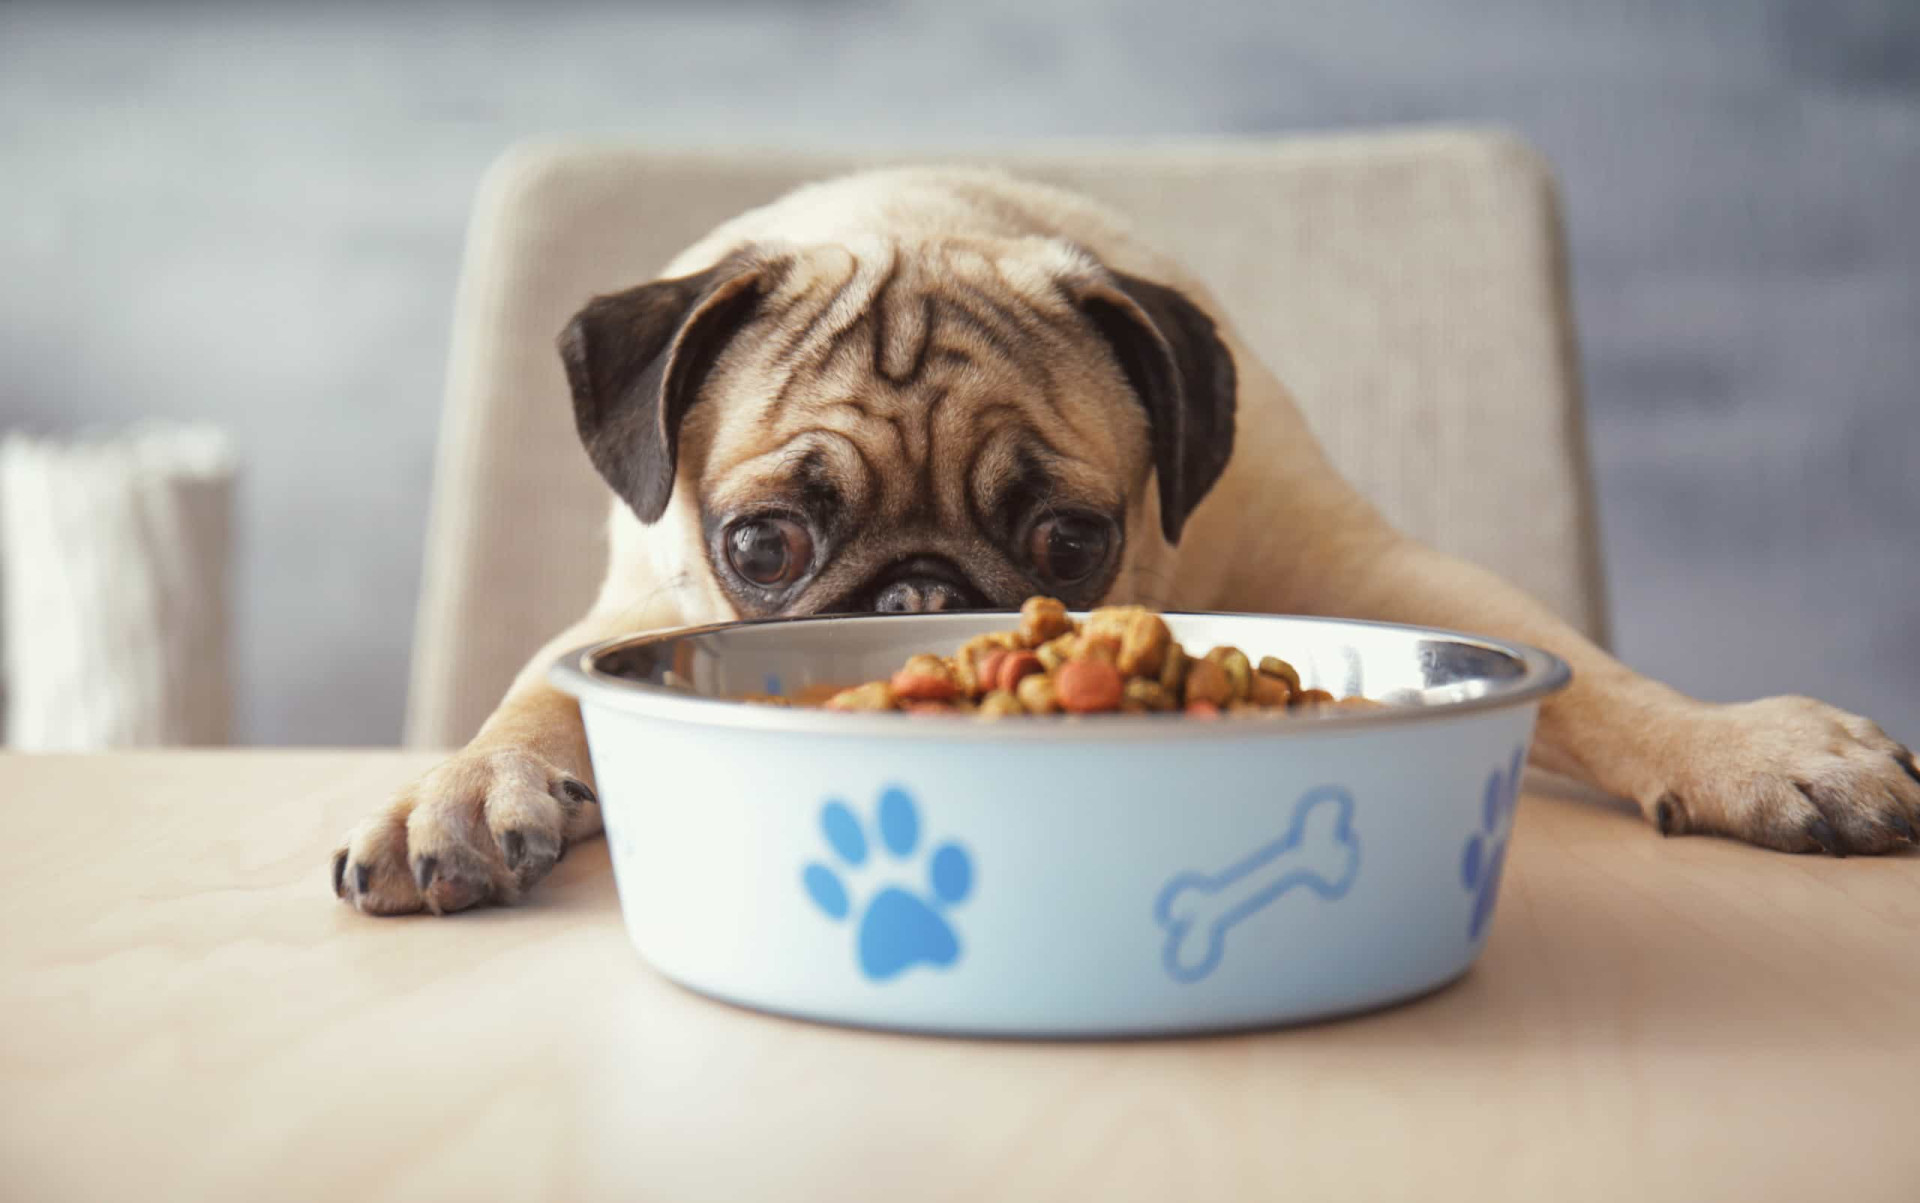 <p>Feed your dog a light meal, about three to four hours prior to traveling. It's best that your pet doesn't get in the car on a full stomach.</p><p>You may also like:<a href="https://www.starsinsider.com/n/352980?utm_source=msn.com&utm_medium=display&utm_campaign=referral_description&utm_content=719768en-us"> Trying to lose weight? Don't make these common mistakes! </a></p>